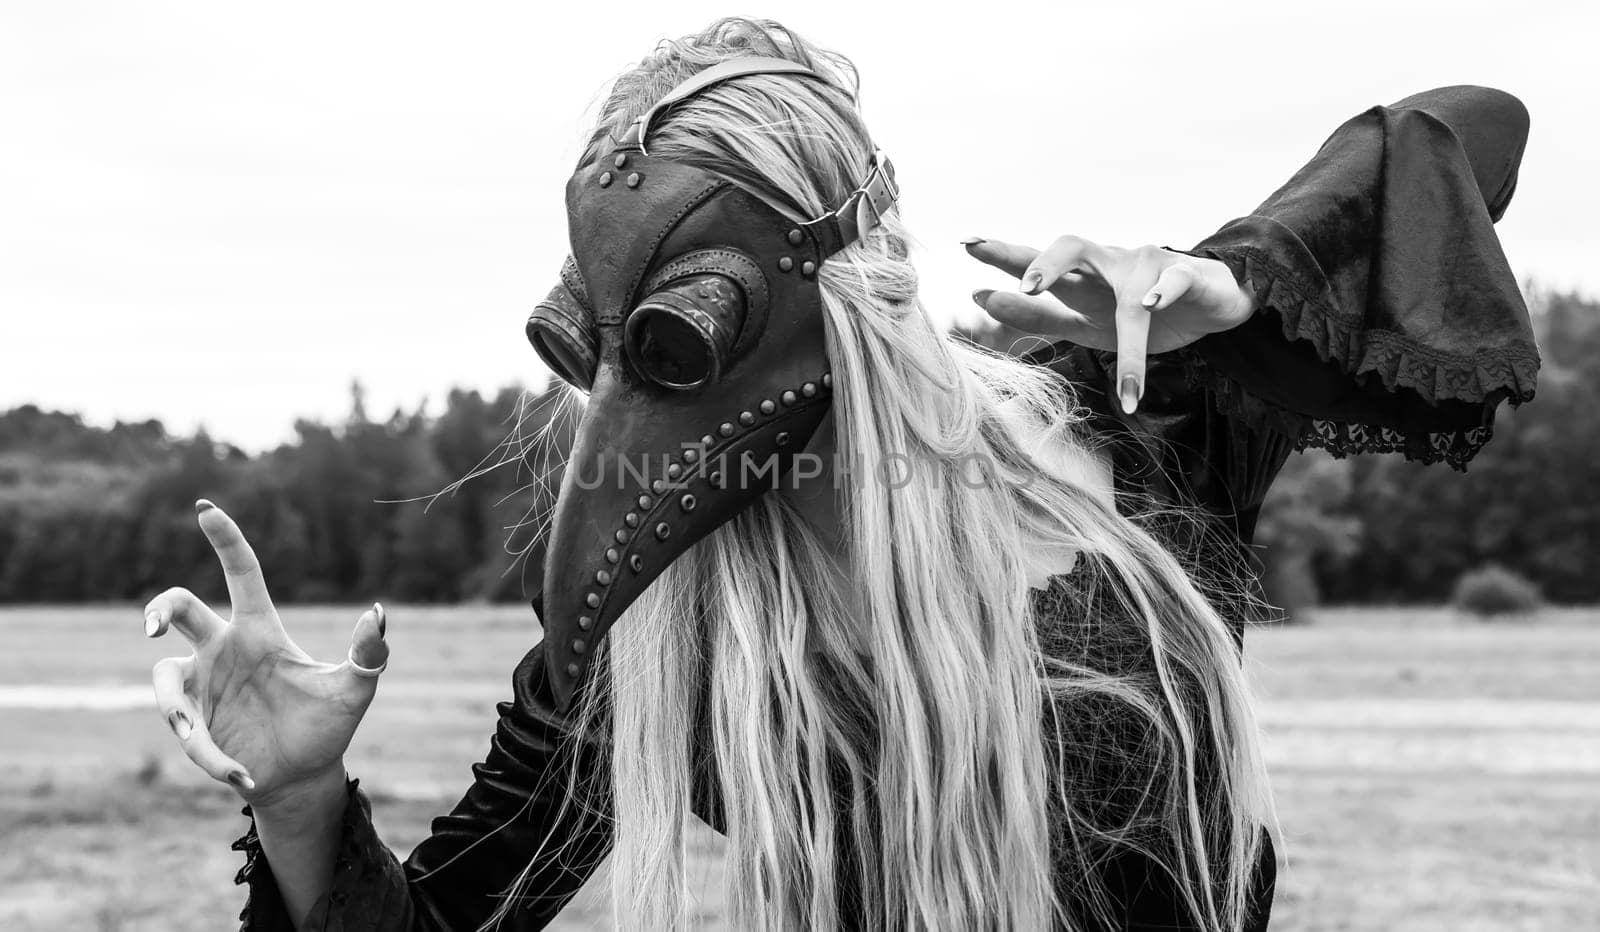 An eerie and surreal photo of a woman in a crow mask standing in a field. Black and white image